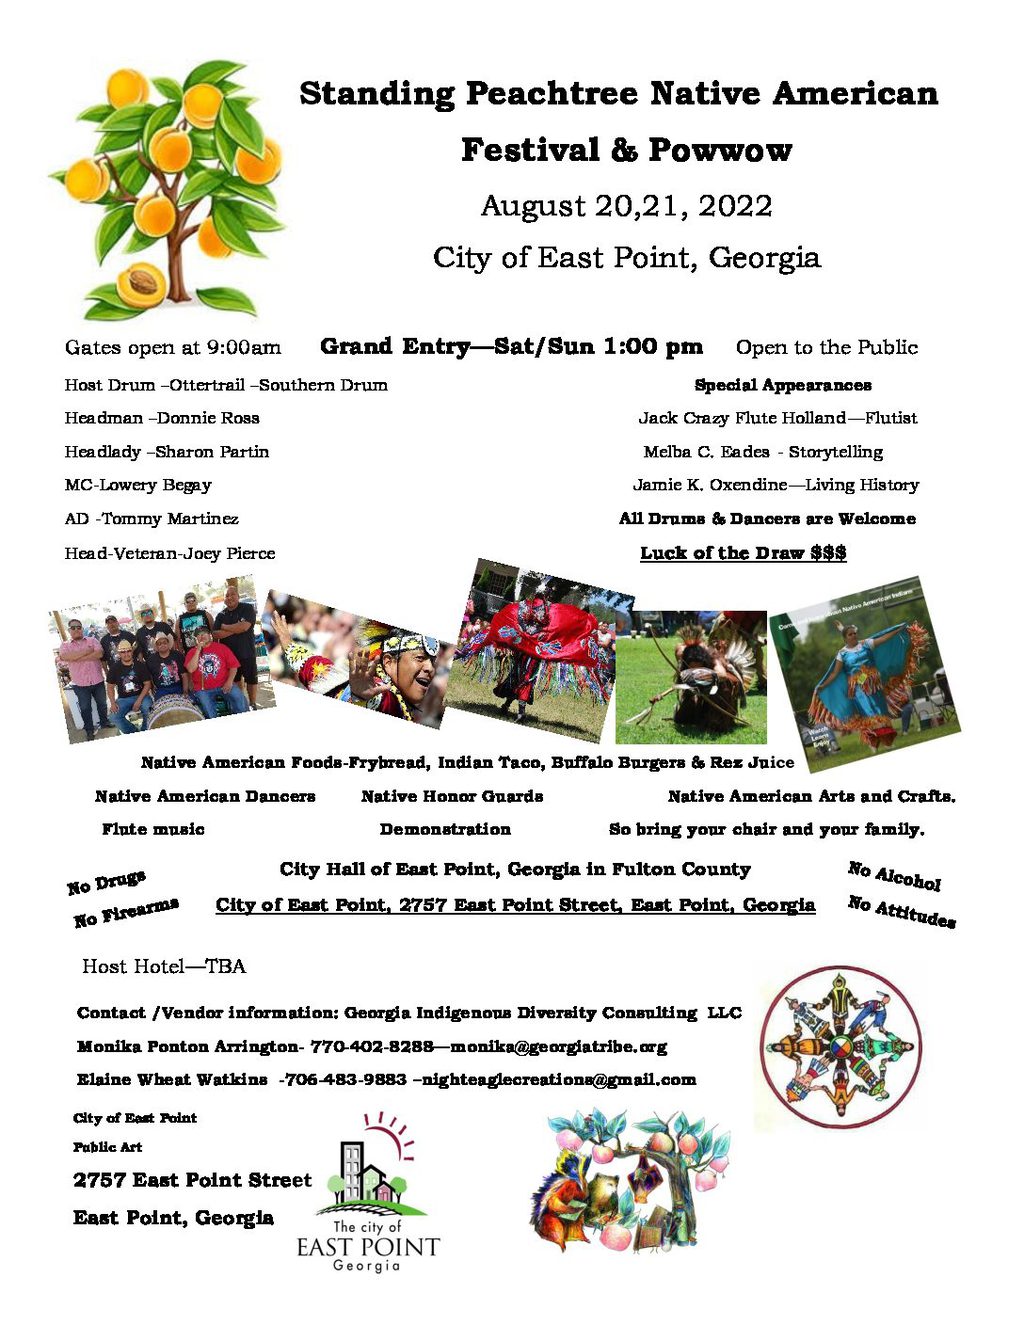 Standing Peachtree Native American Festival & Pow Wow 2022